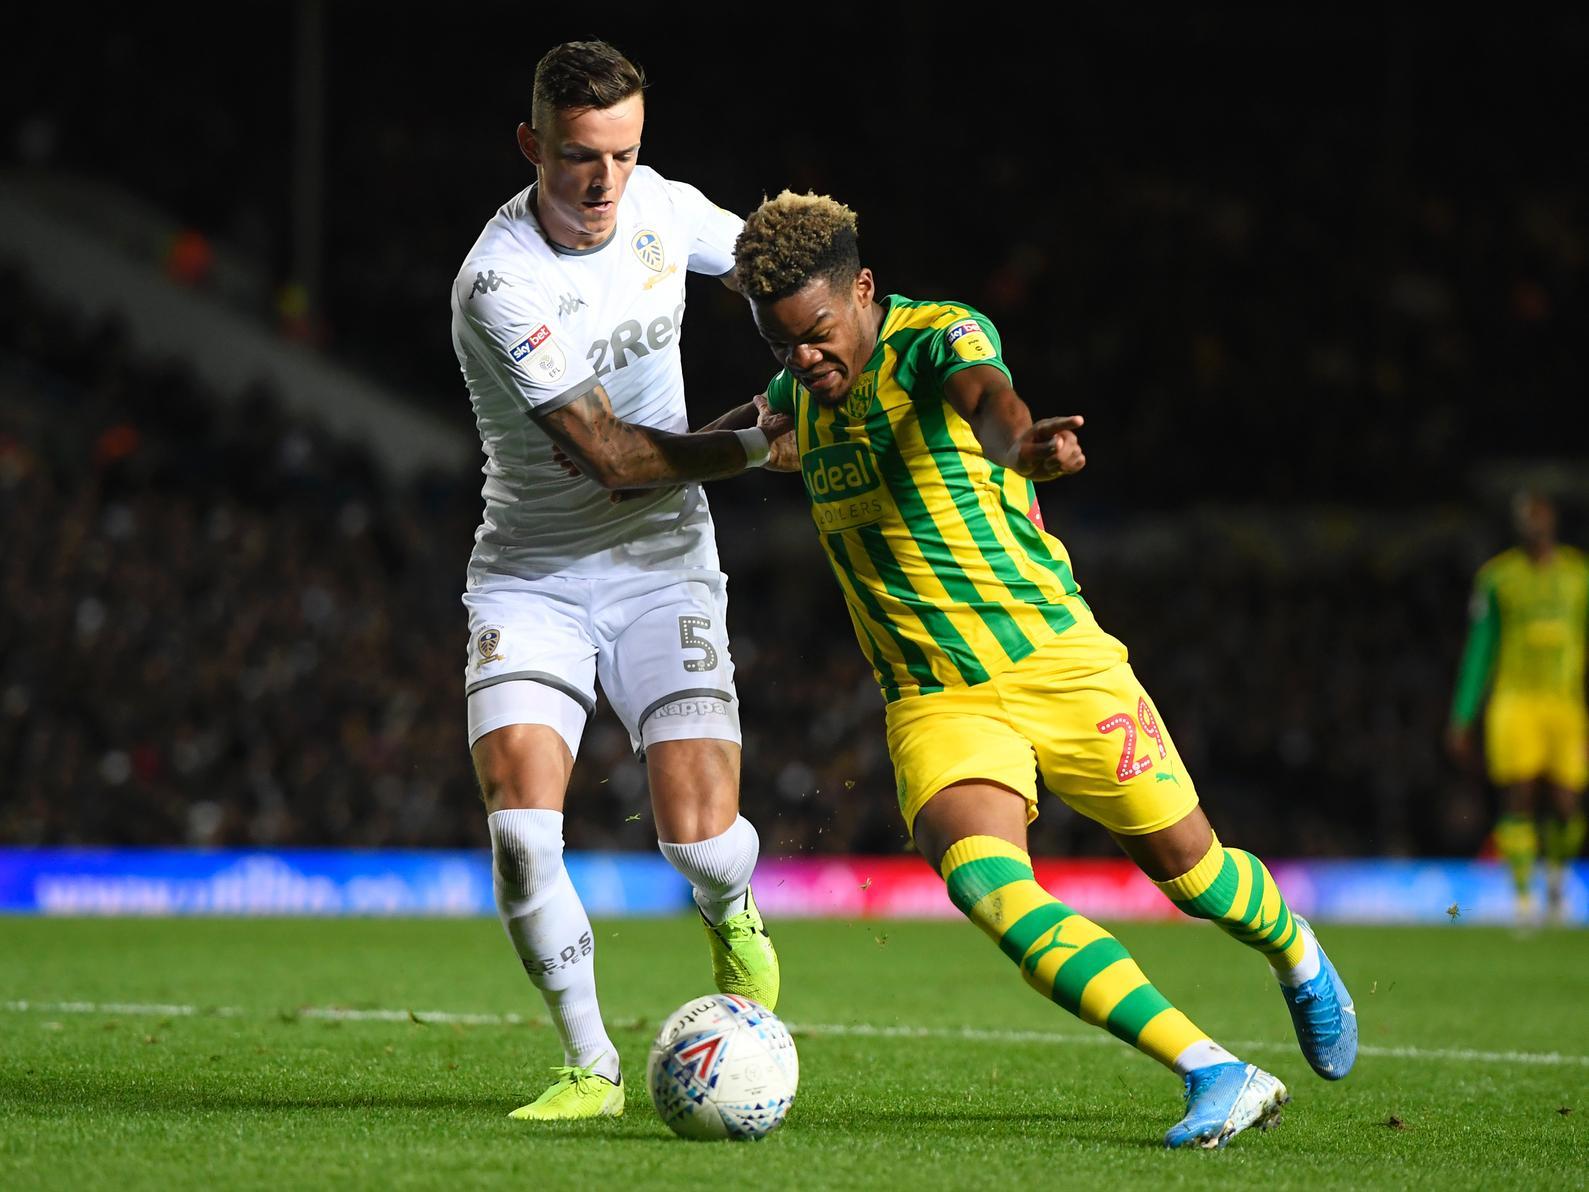 Ex-Leeds United man Noel Whelan has urged the Whites to sign loanee Ben White if he helps them earn promotion this season, but has admitted that it would cost "a lot of money." (BBC Radio Leeds)